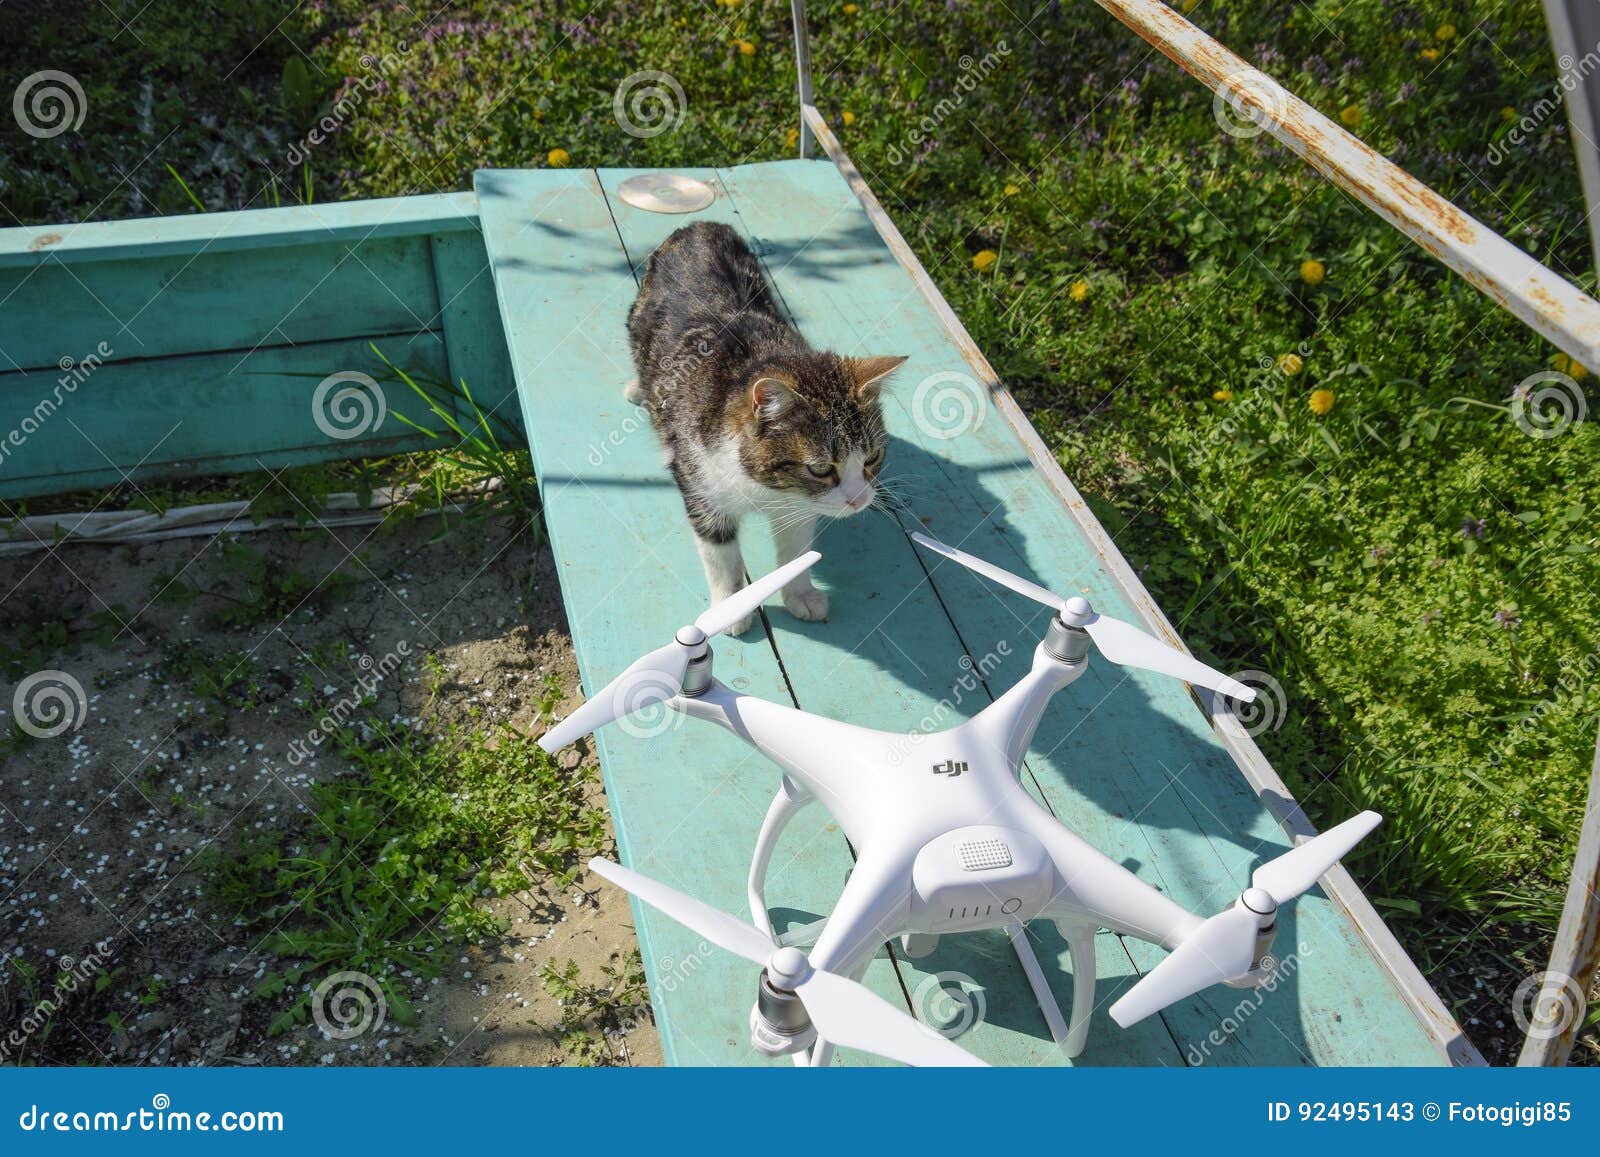 The Sniffs the Drone DJI Phantom 4. Surprise the Animal with a New Gadget. Quadrocopter and Cat and Drone Editorial Stock Photo - of octacopter, 92495143